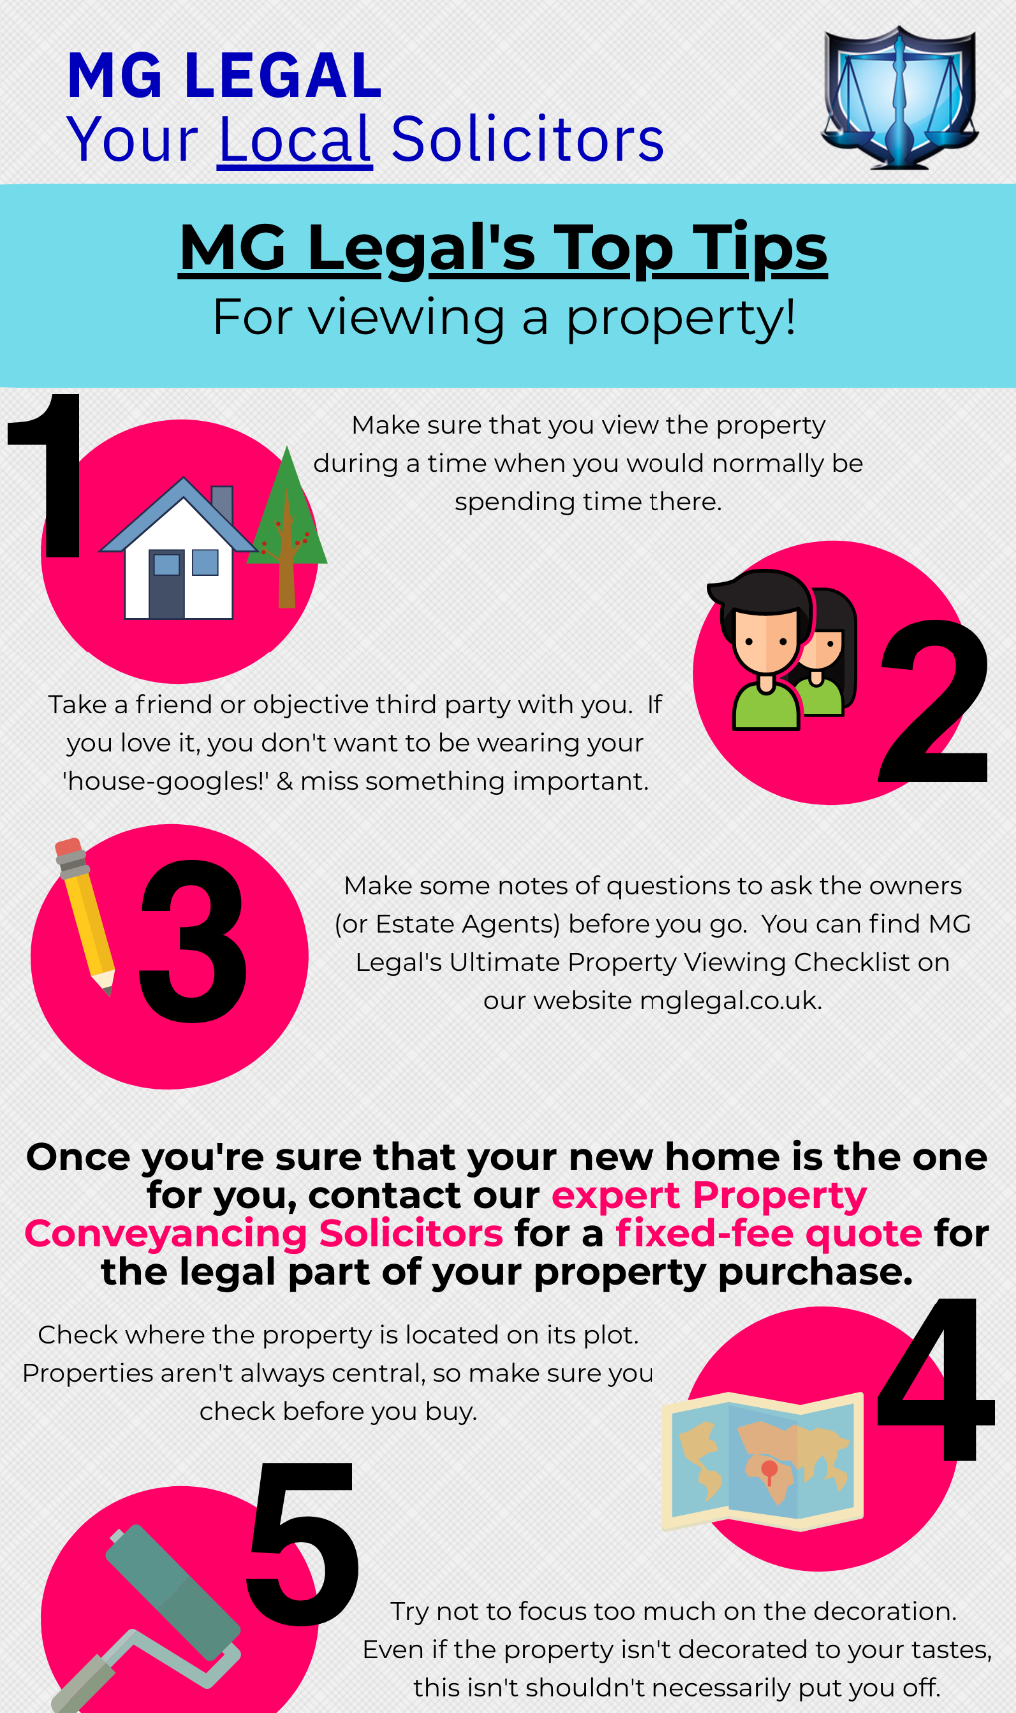 Our Conveyancing Solicitors' tips for viewing a property